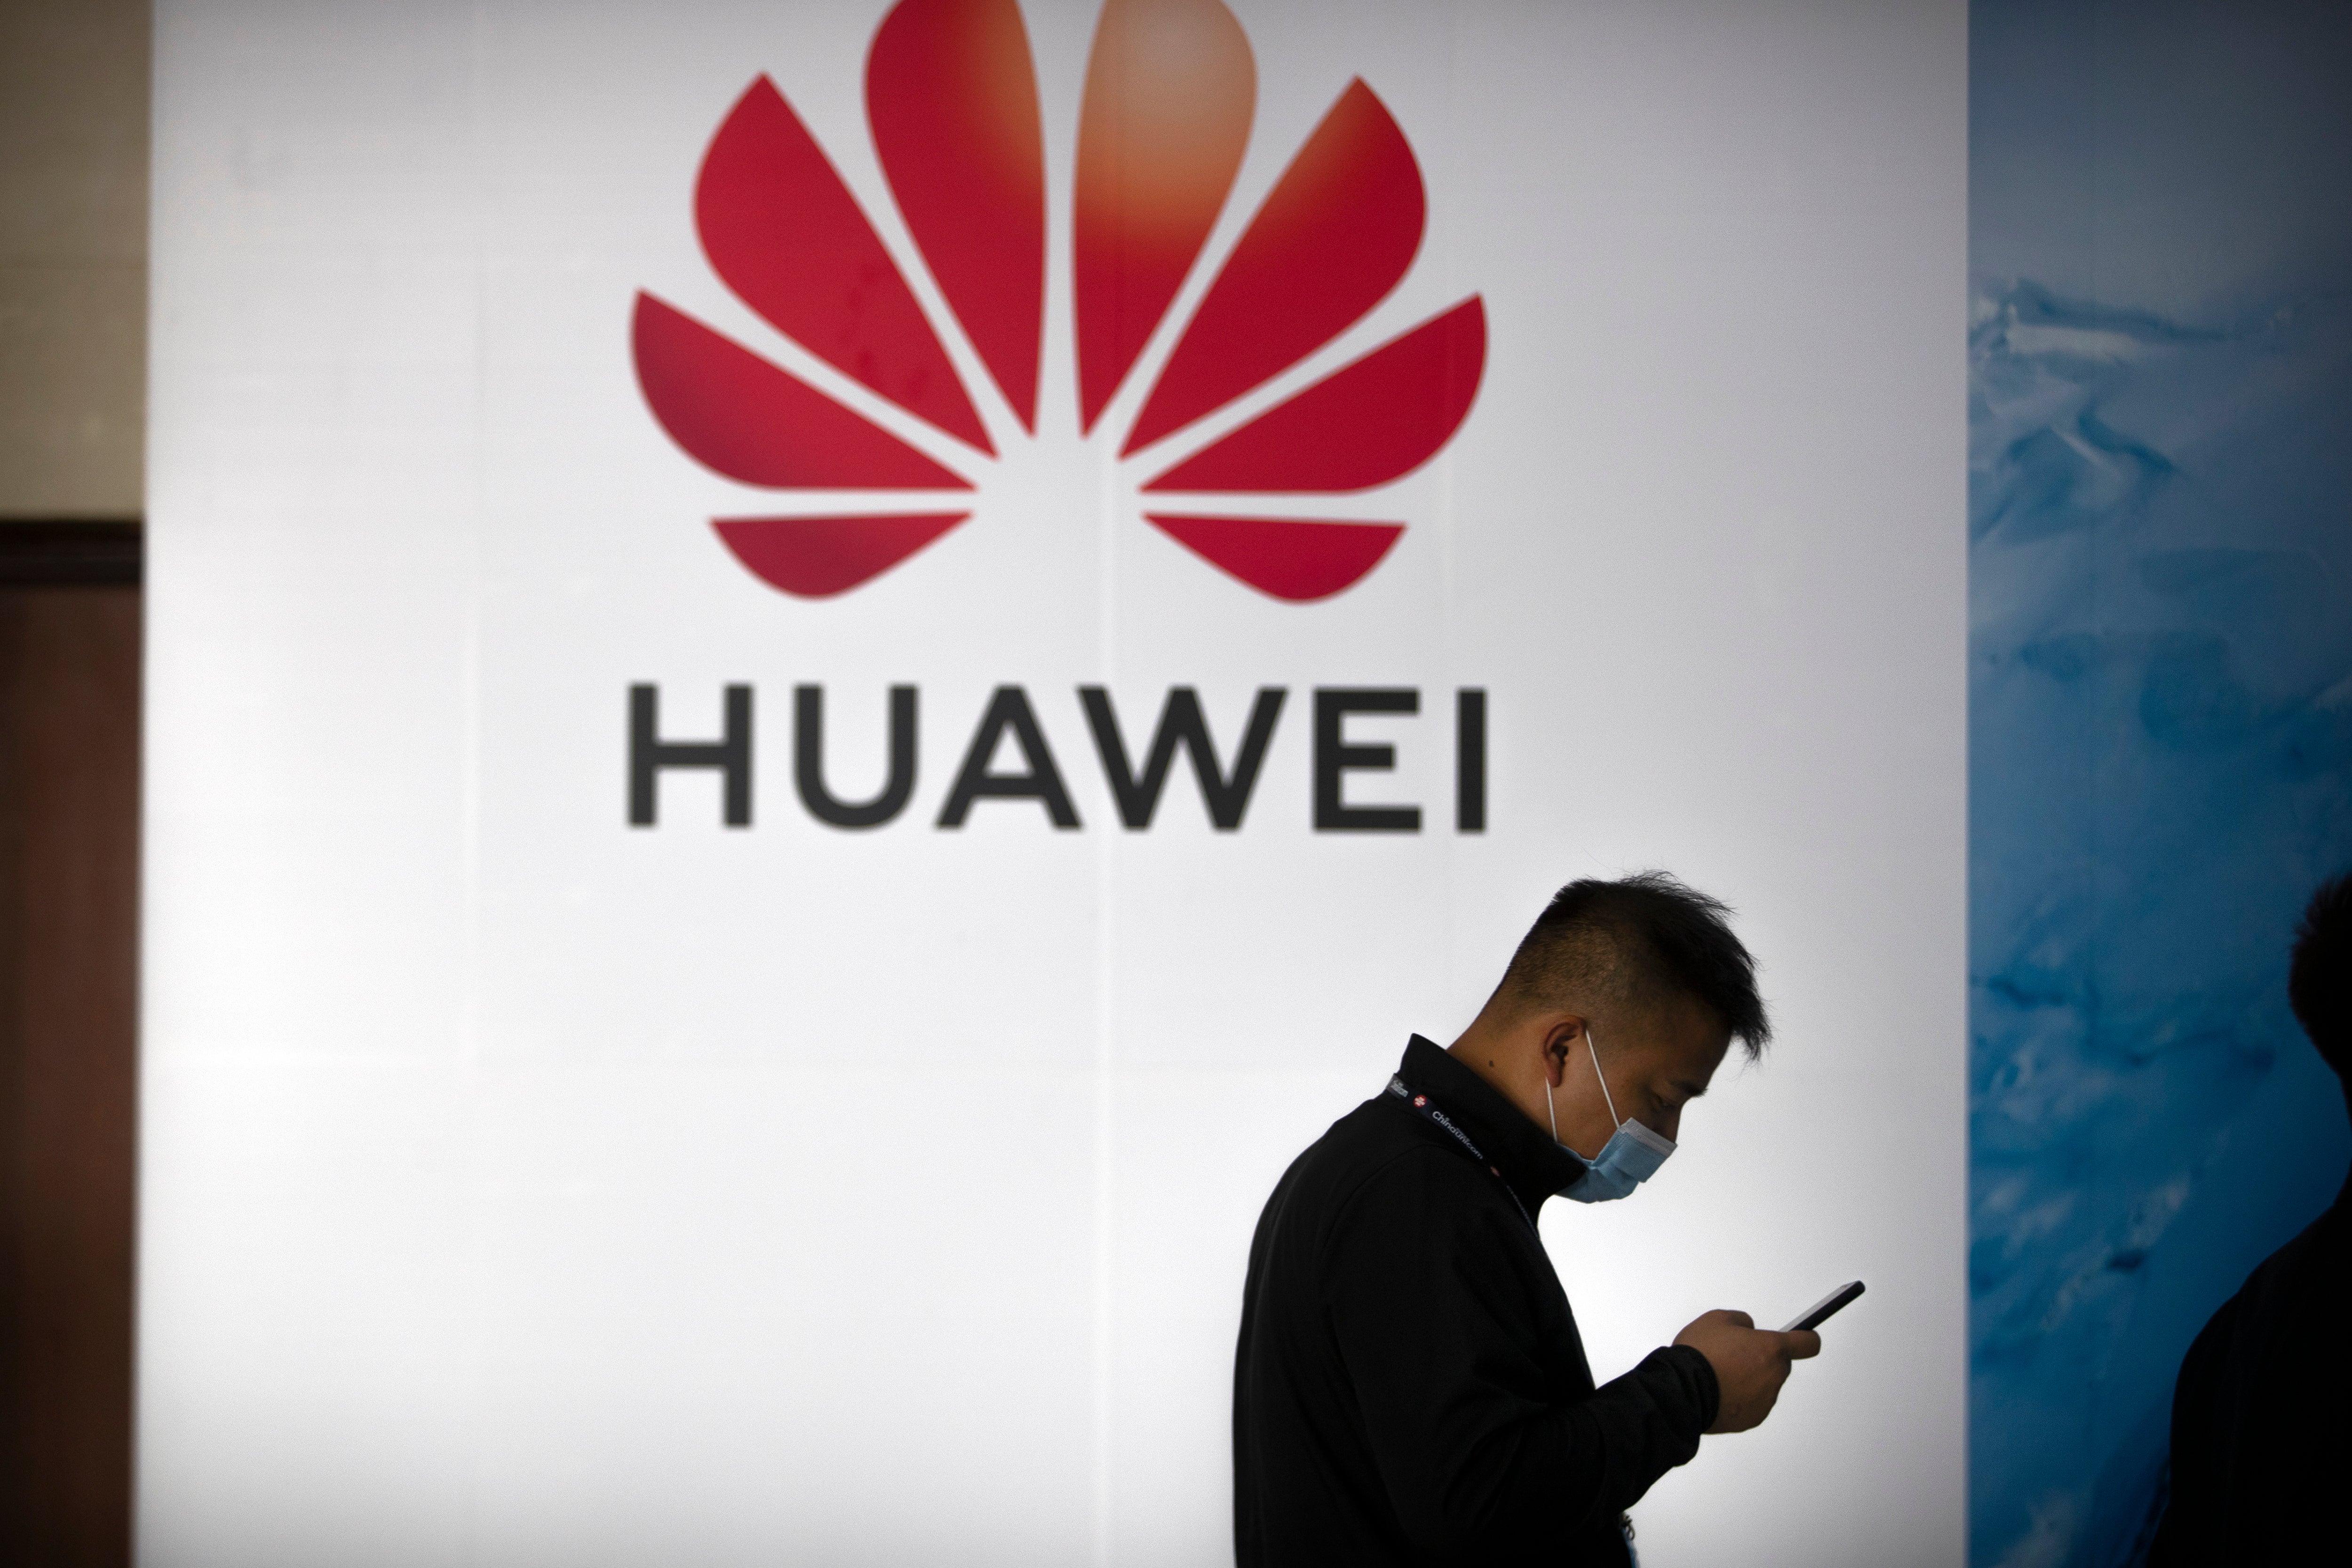 The government previously said Huawei could be involved in the project but had a change of heart following growing security concerns about China